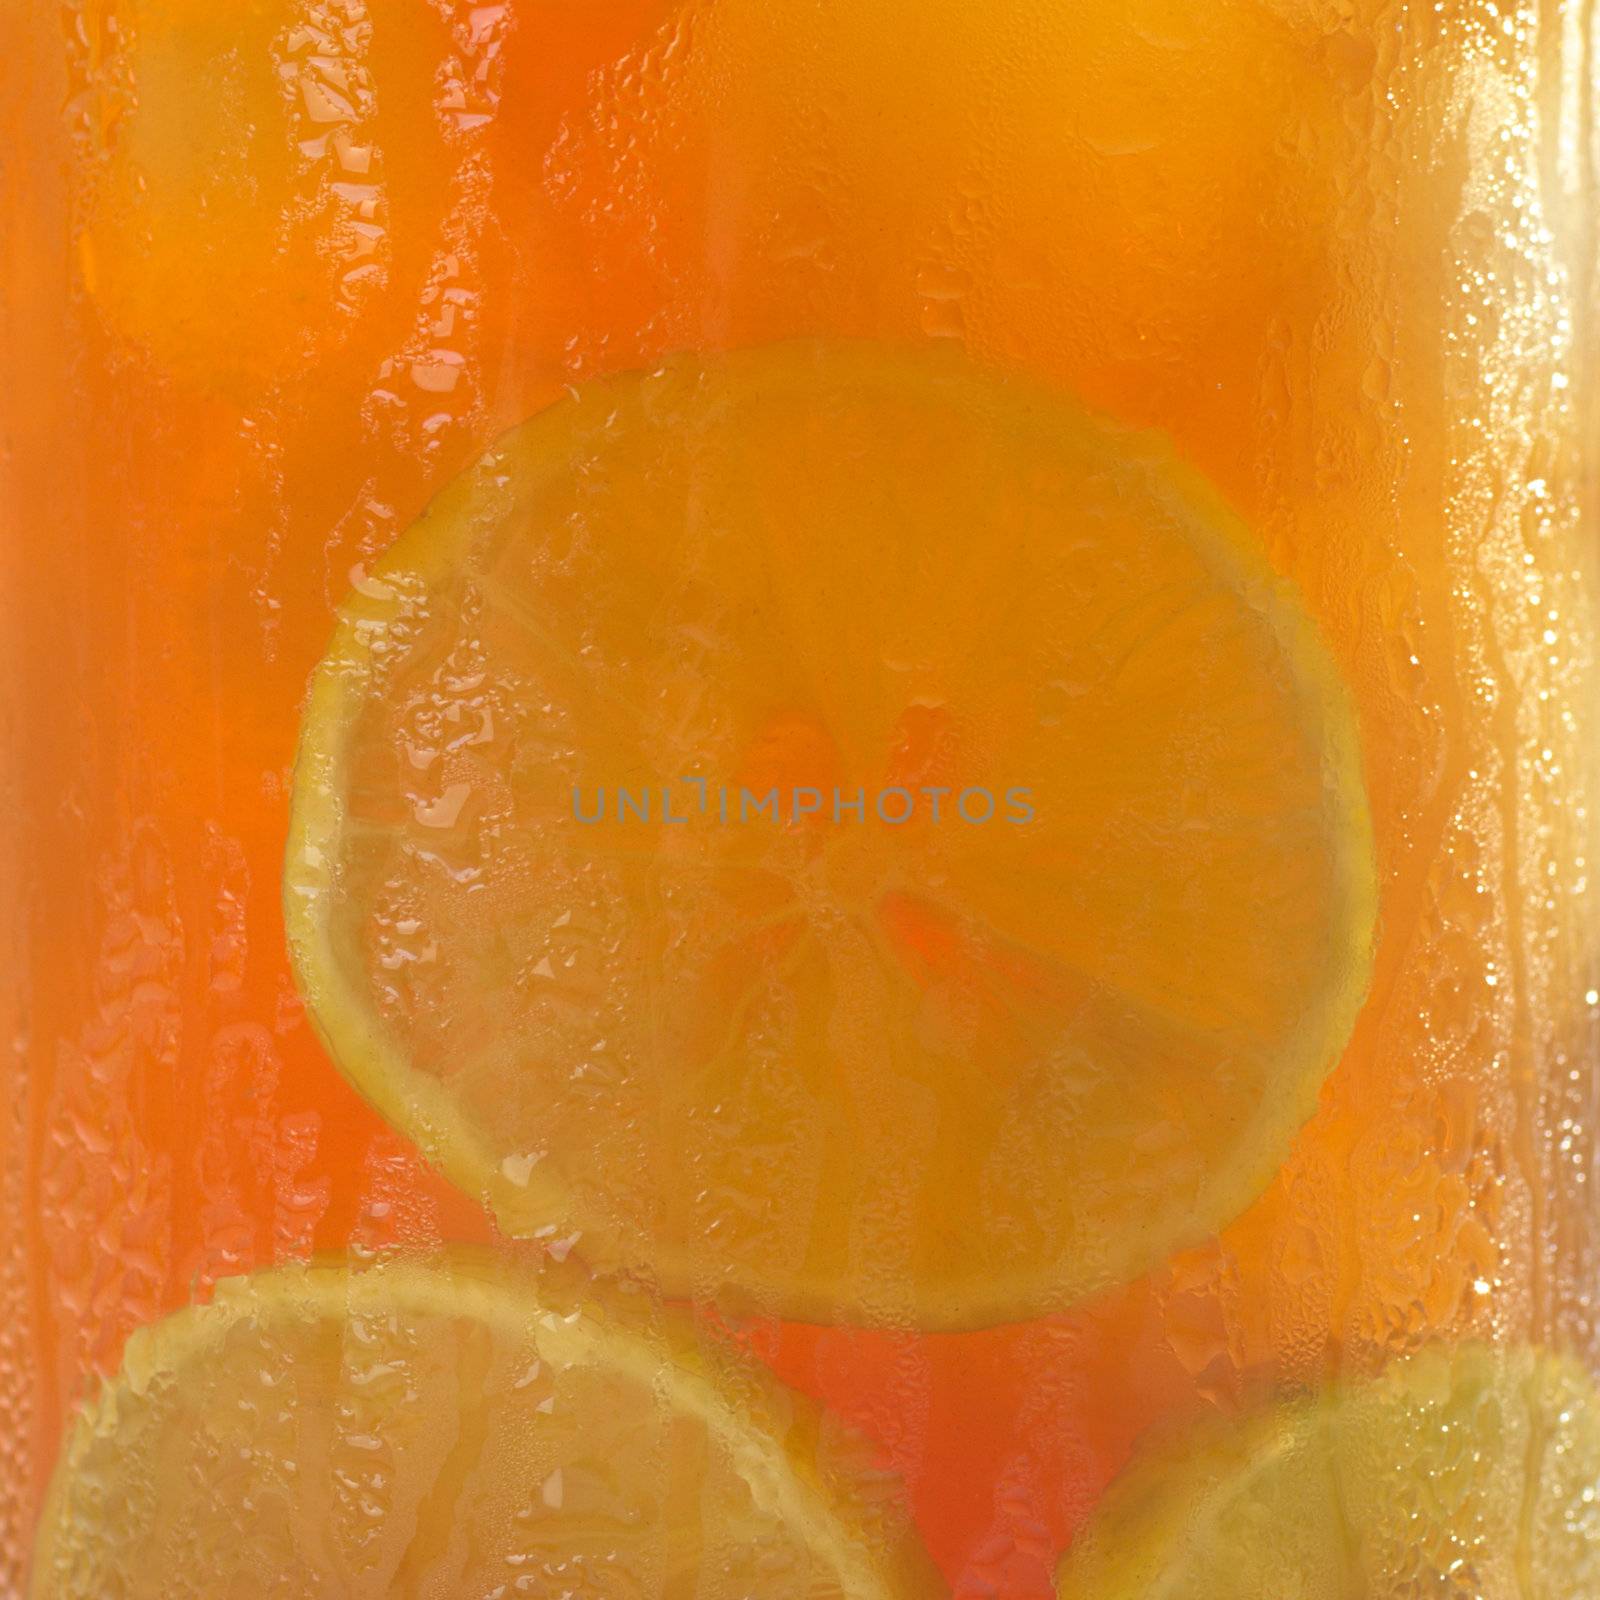 Iced tea as background with lime slices and ice cubes in glass with water drops on the glass 